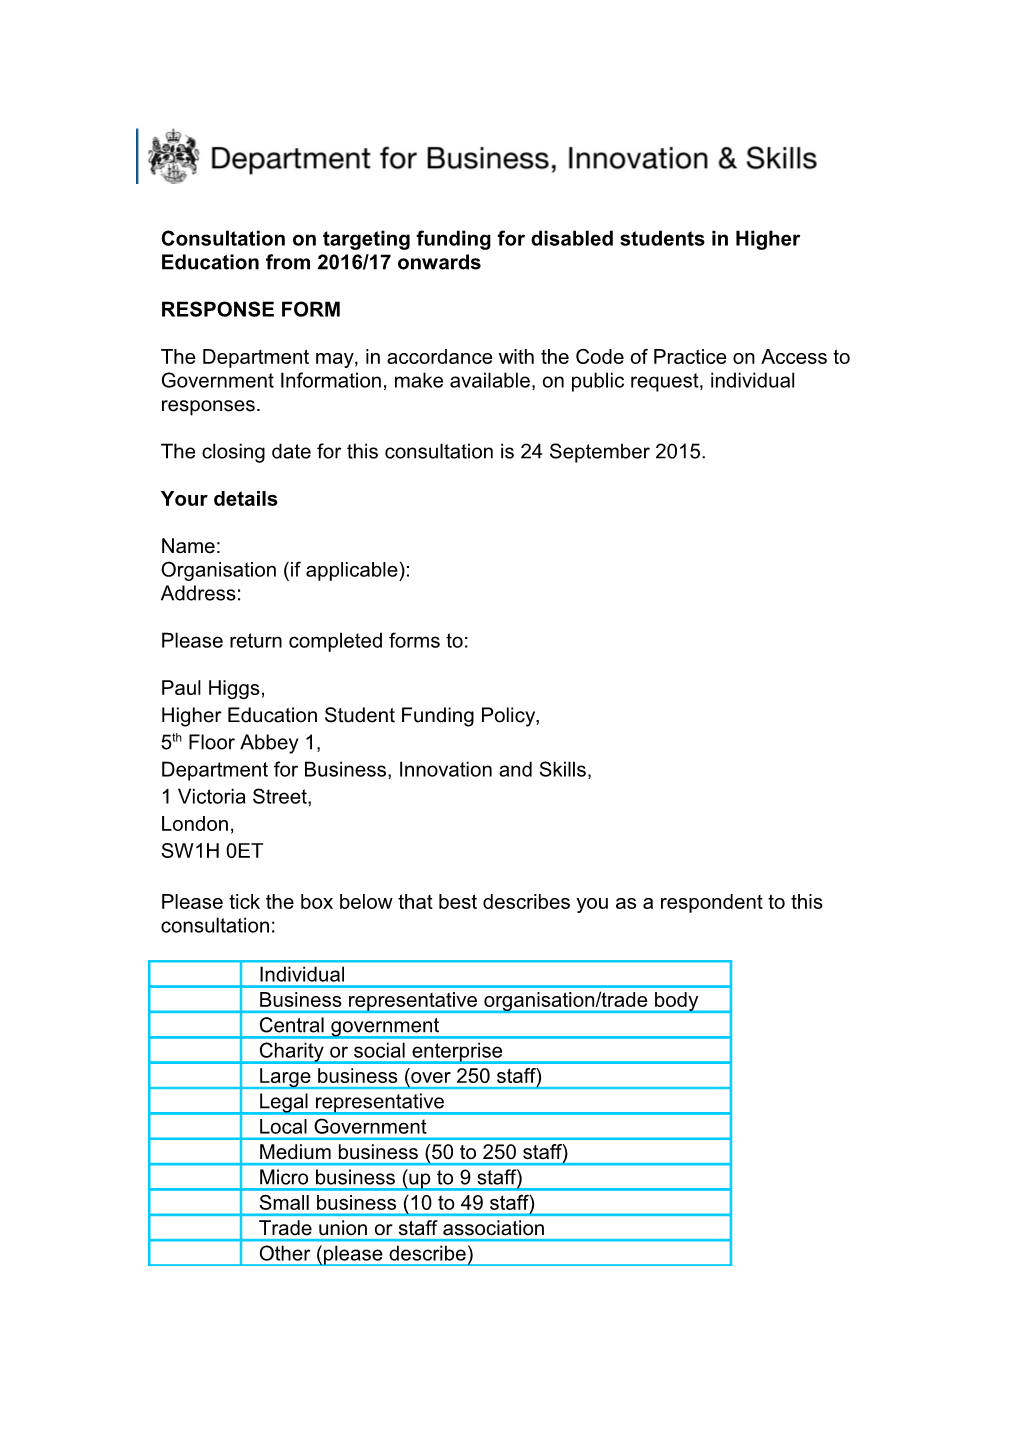 Response Form for Consultation on Targeting Funding for Disabled Students in Higher Education